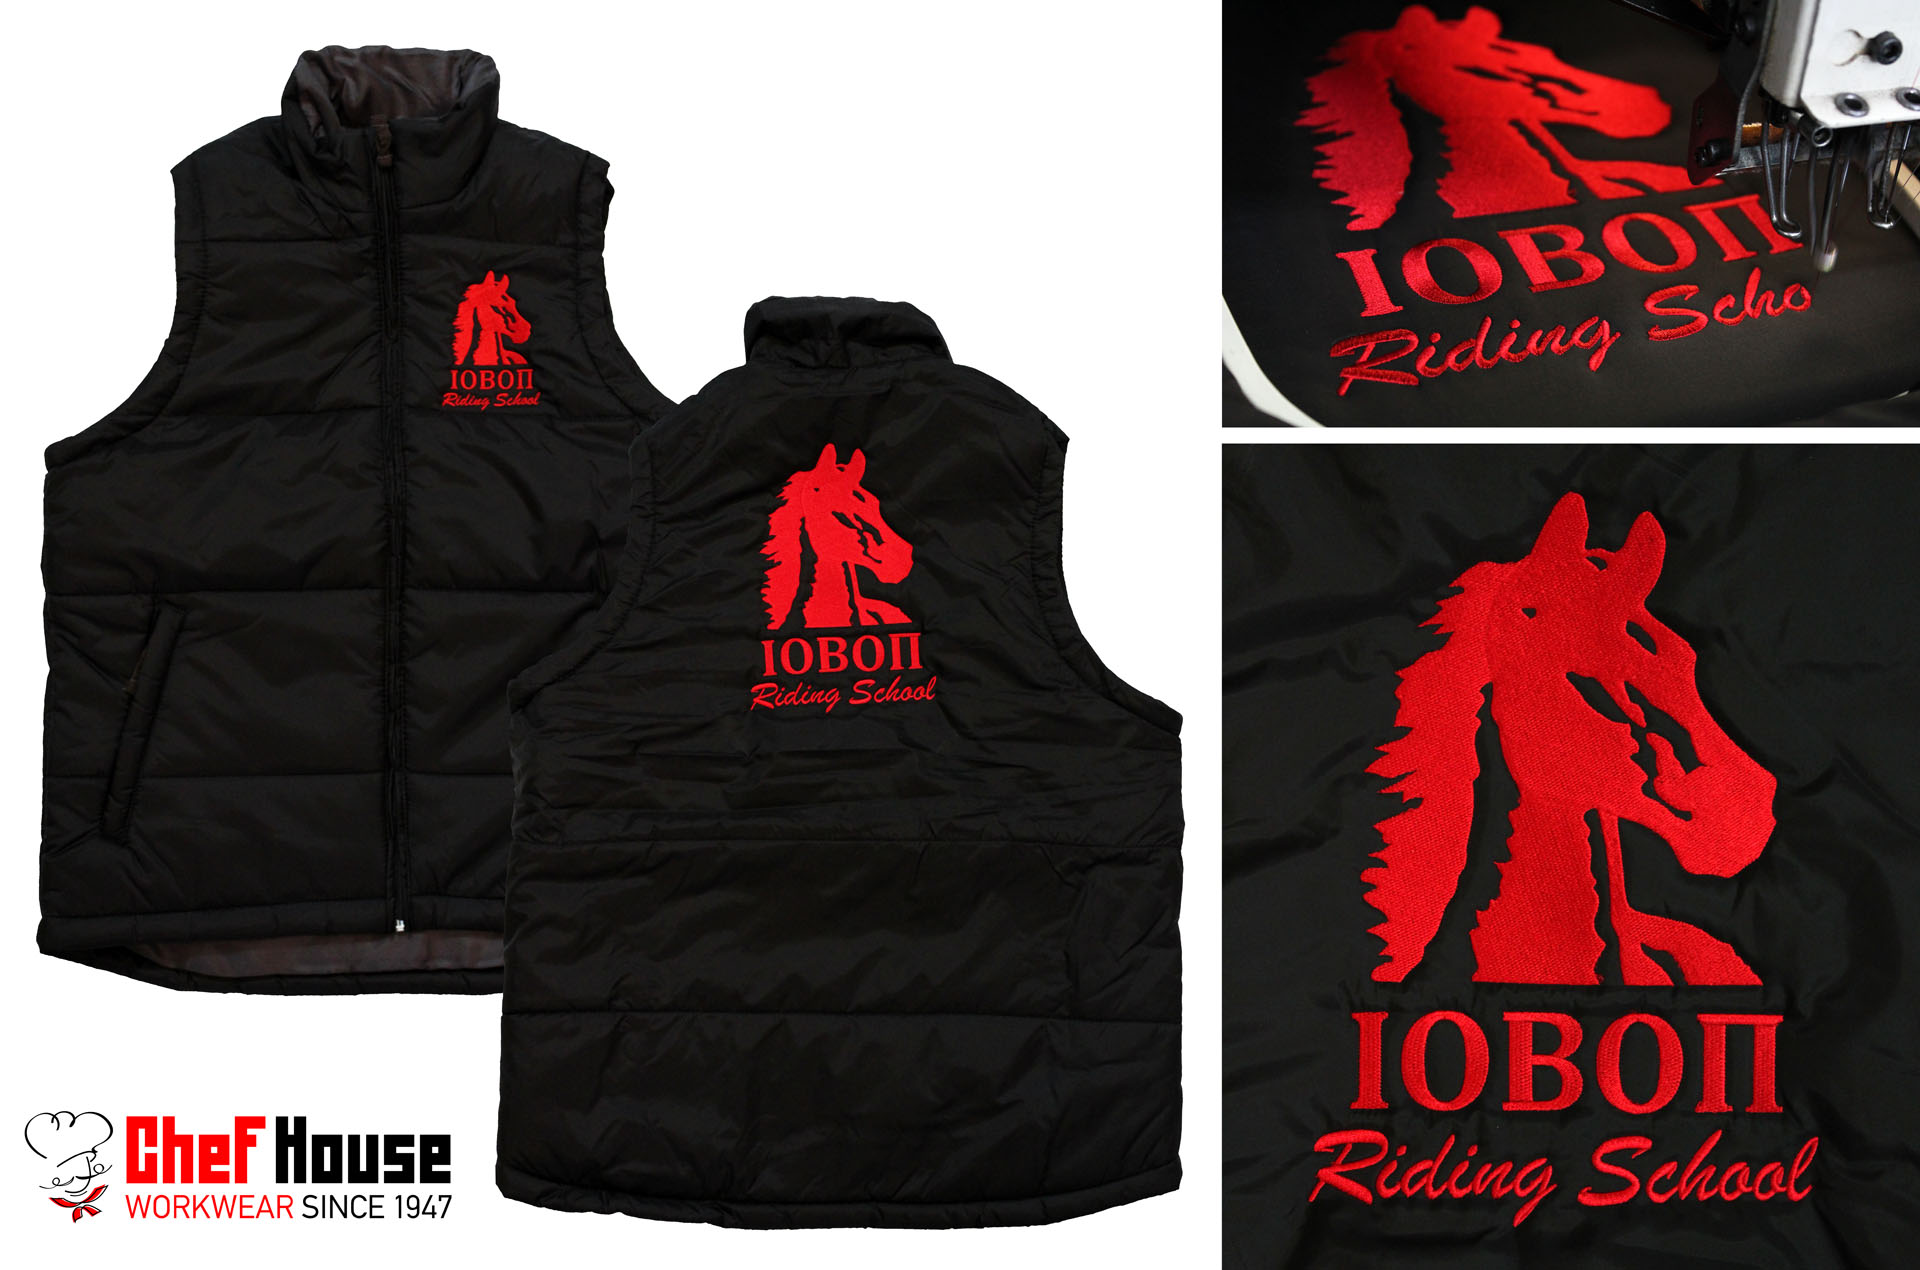 Embroidery IOVOP Riding School by Chef House Workwear